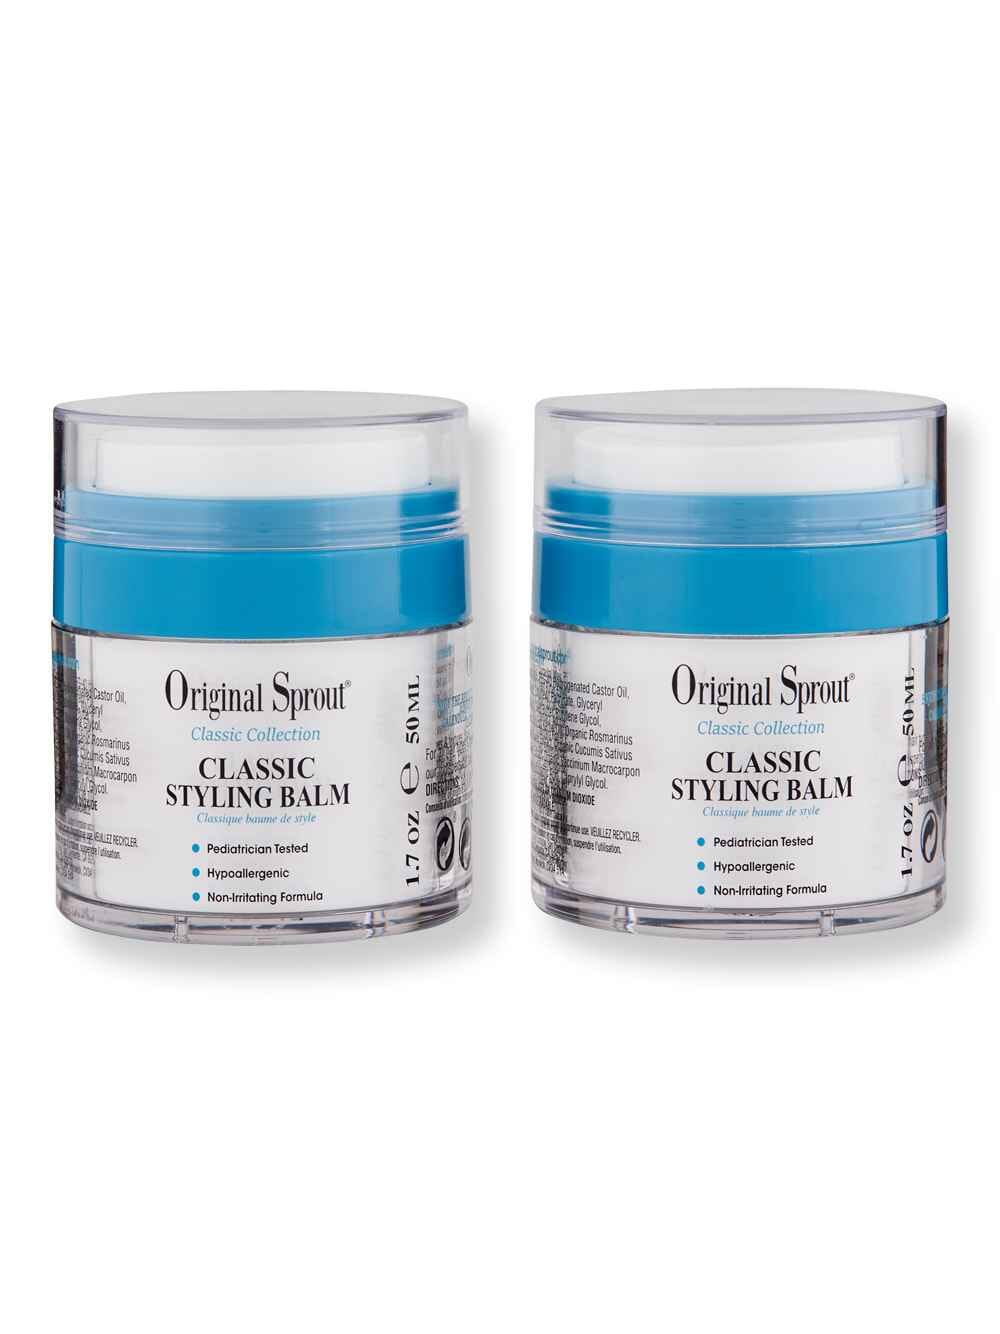 Original Sprout Original Sprout Natural Styling Balm 2 ct 2 oz Styling Treatments 